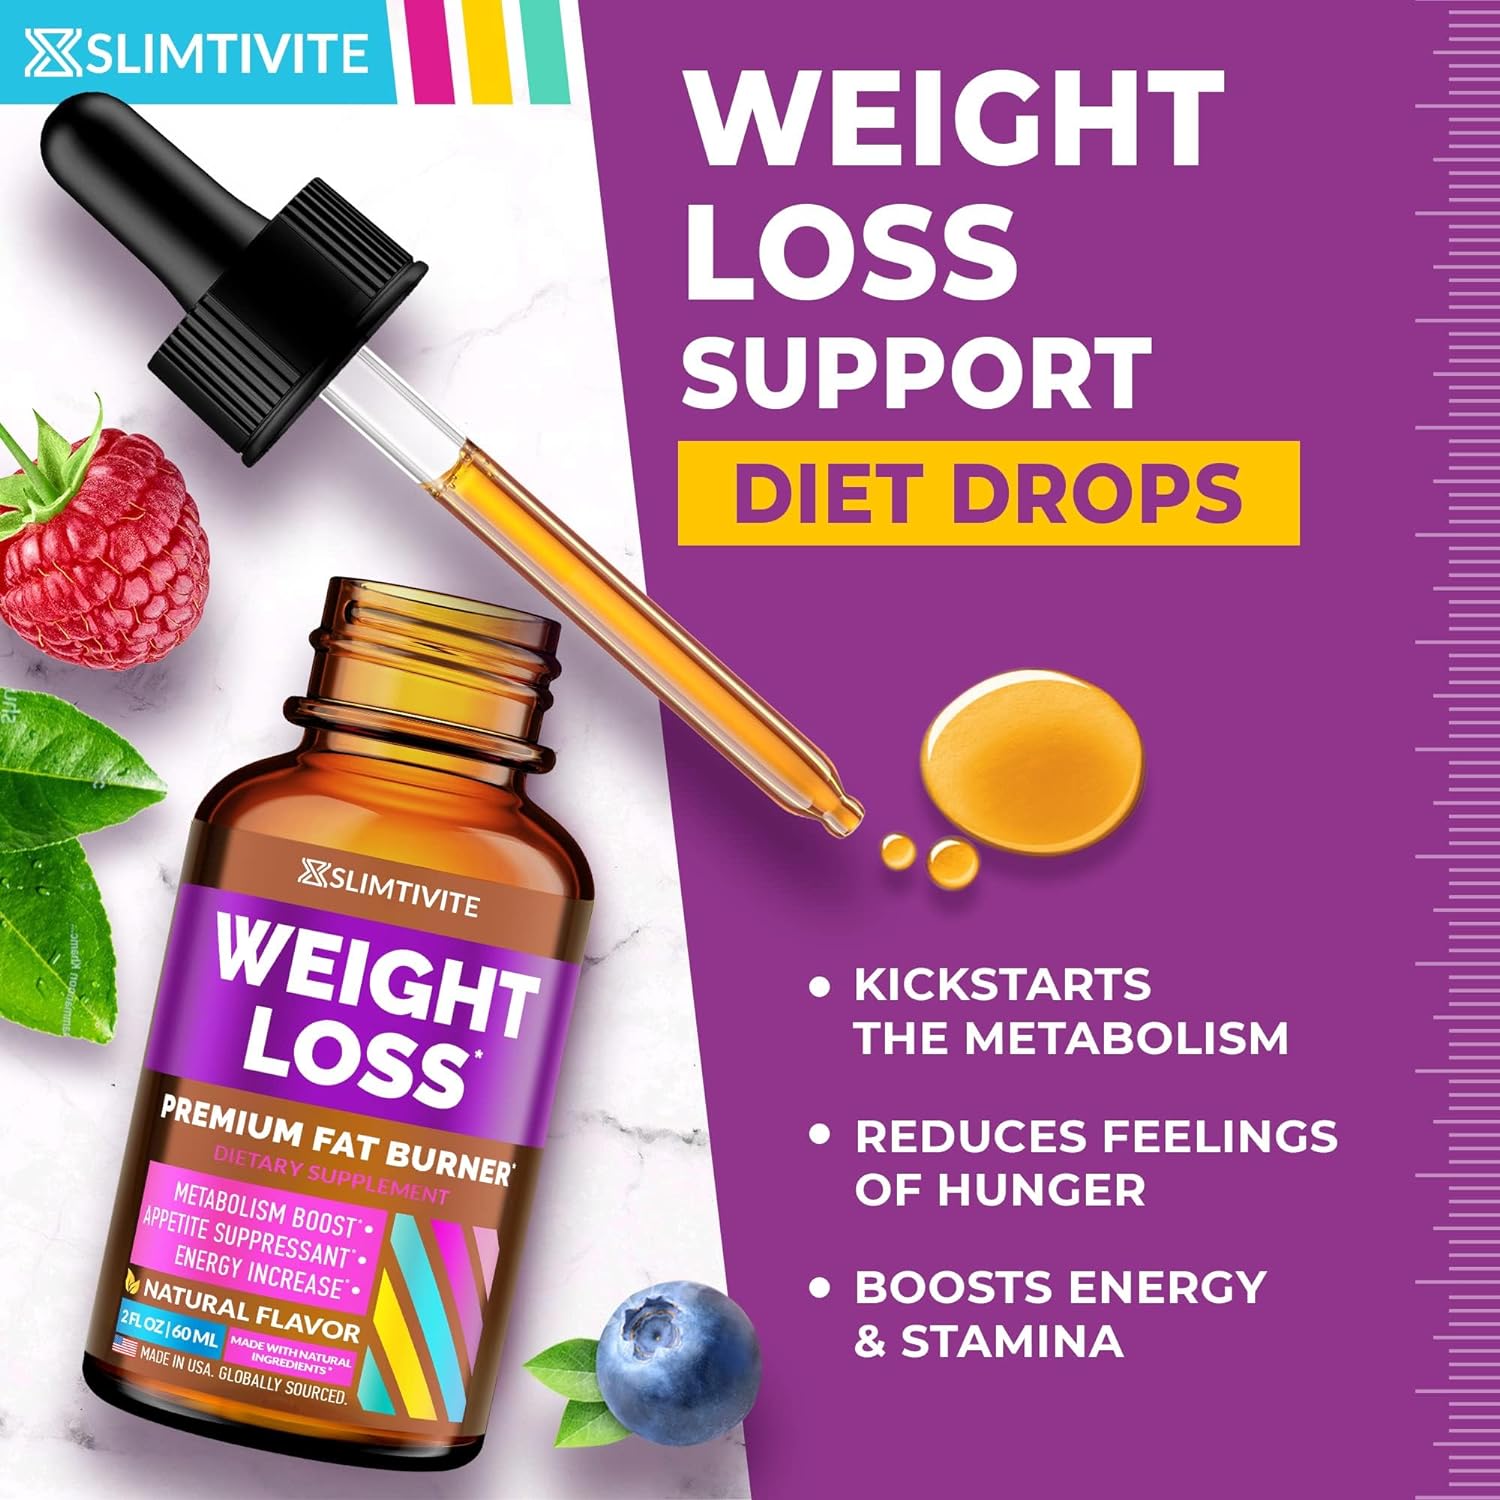 Slimtivite Weight Loss Drops - Diet Drops for Fat Loss - Effective Appetite Suppressant  Metabolism Booster - Safe  Proven Ingredients - Non-GMO Fat Burner